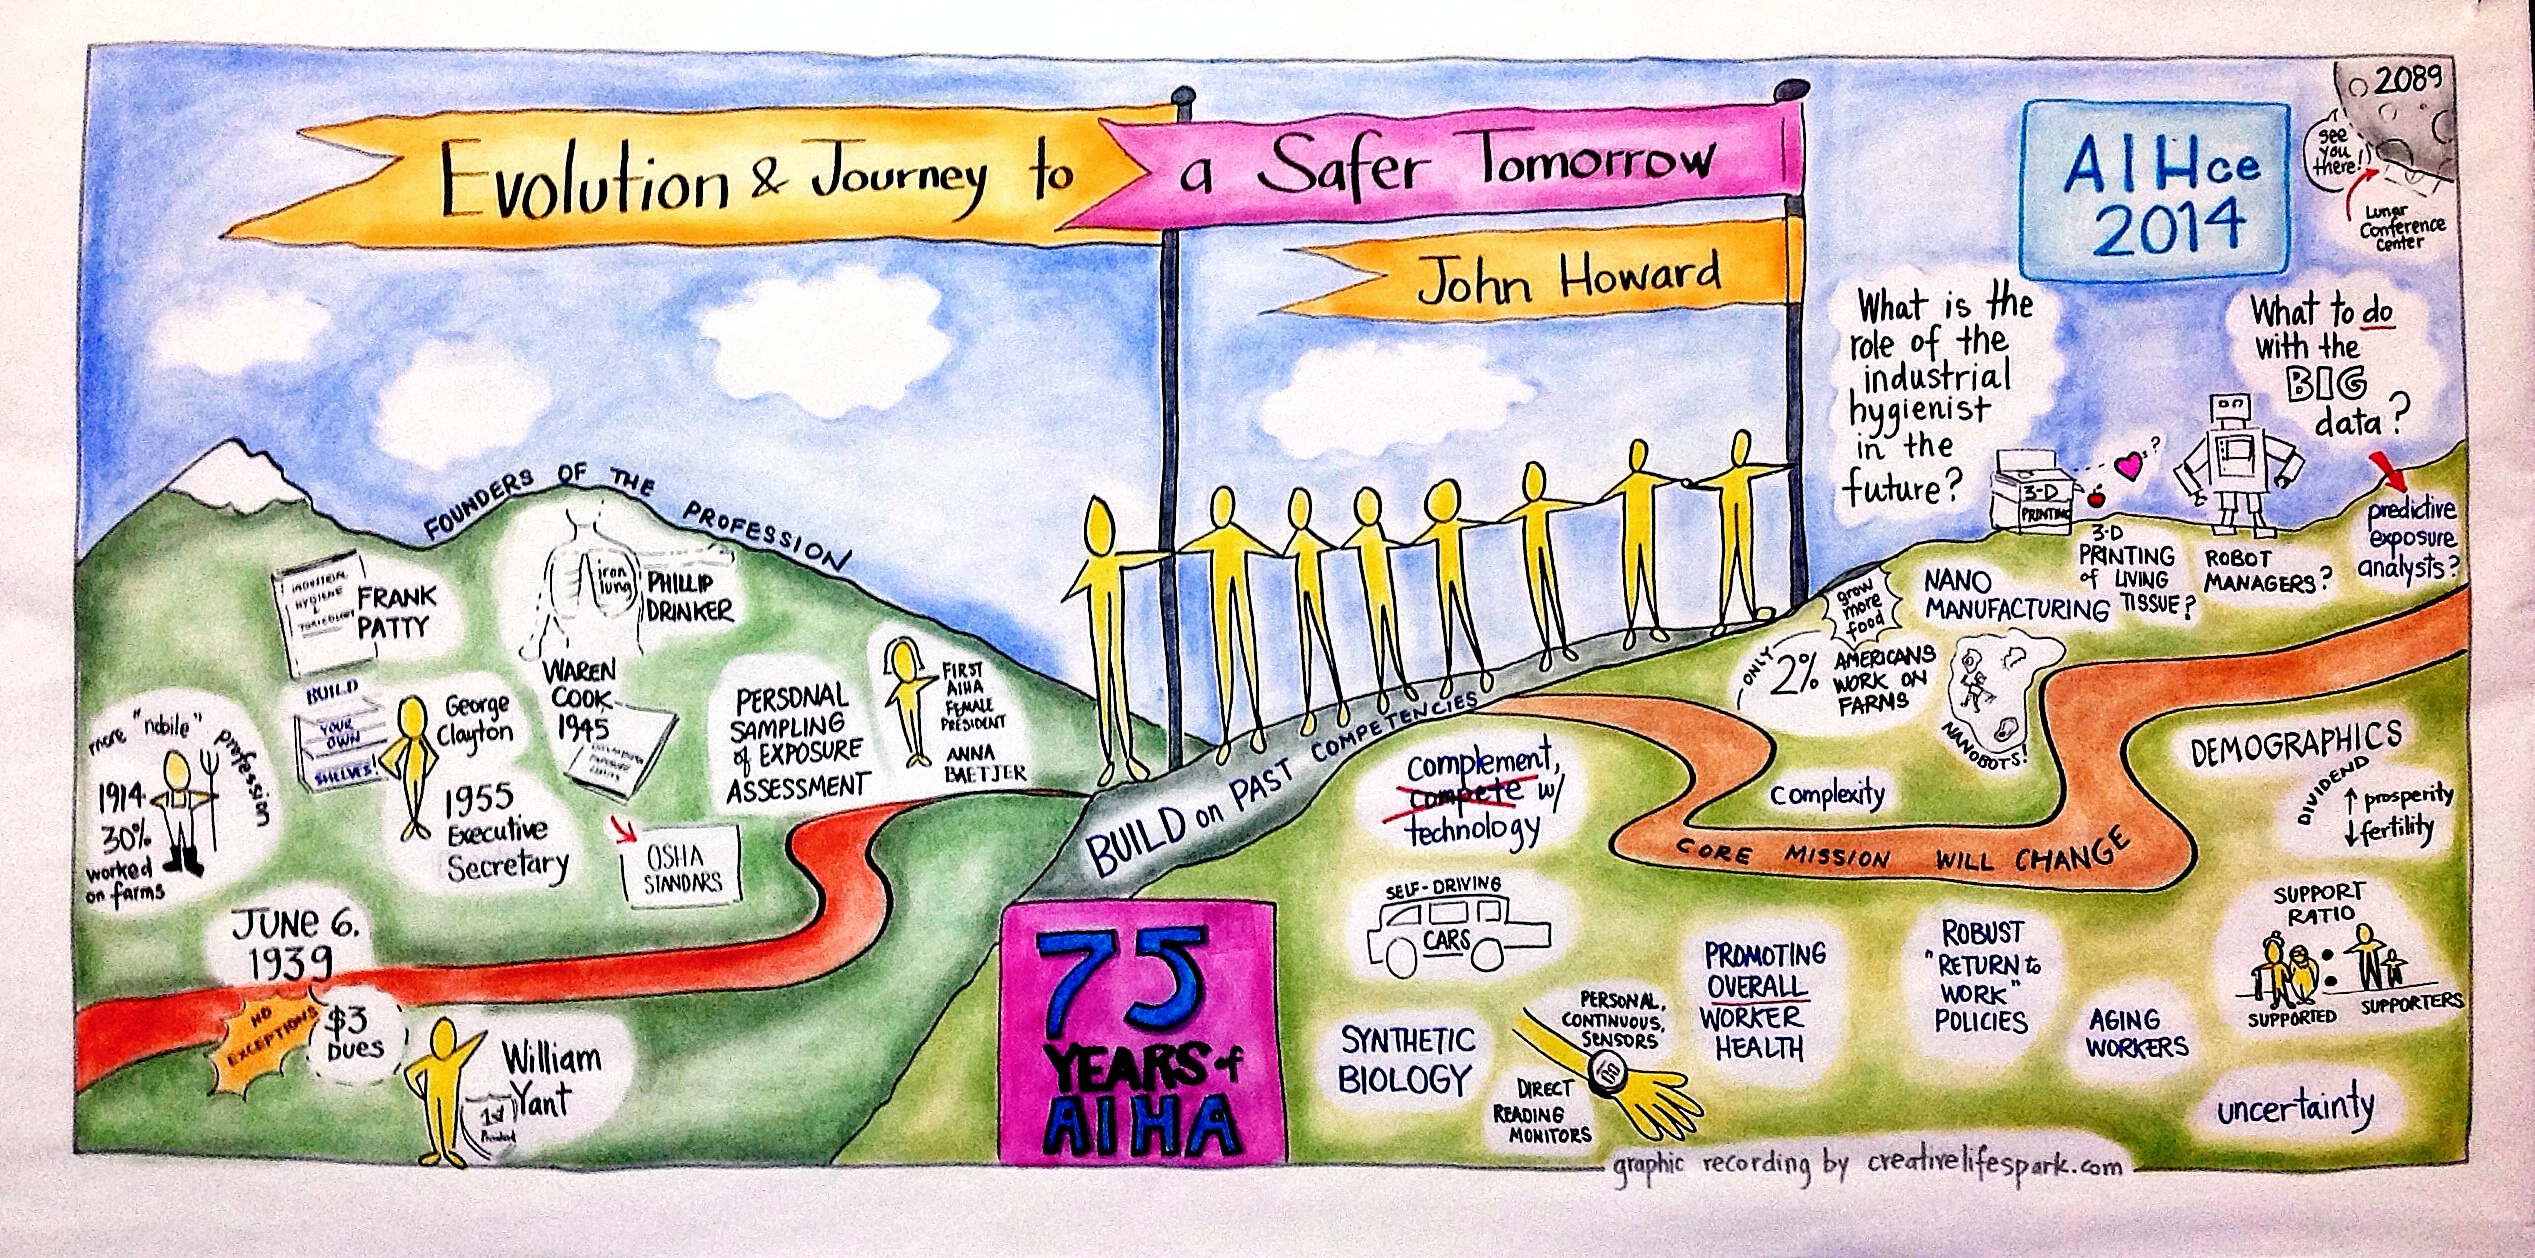 Graphic Recording Evolution & Journey to a Safer Tomorrow AIHCe by Creative Catalyst, Katherine Torrini